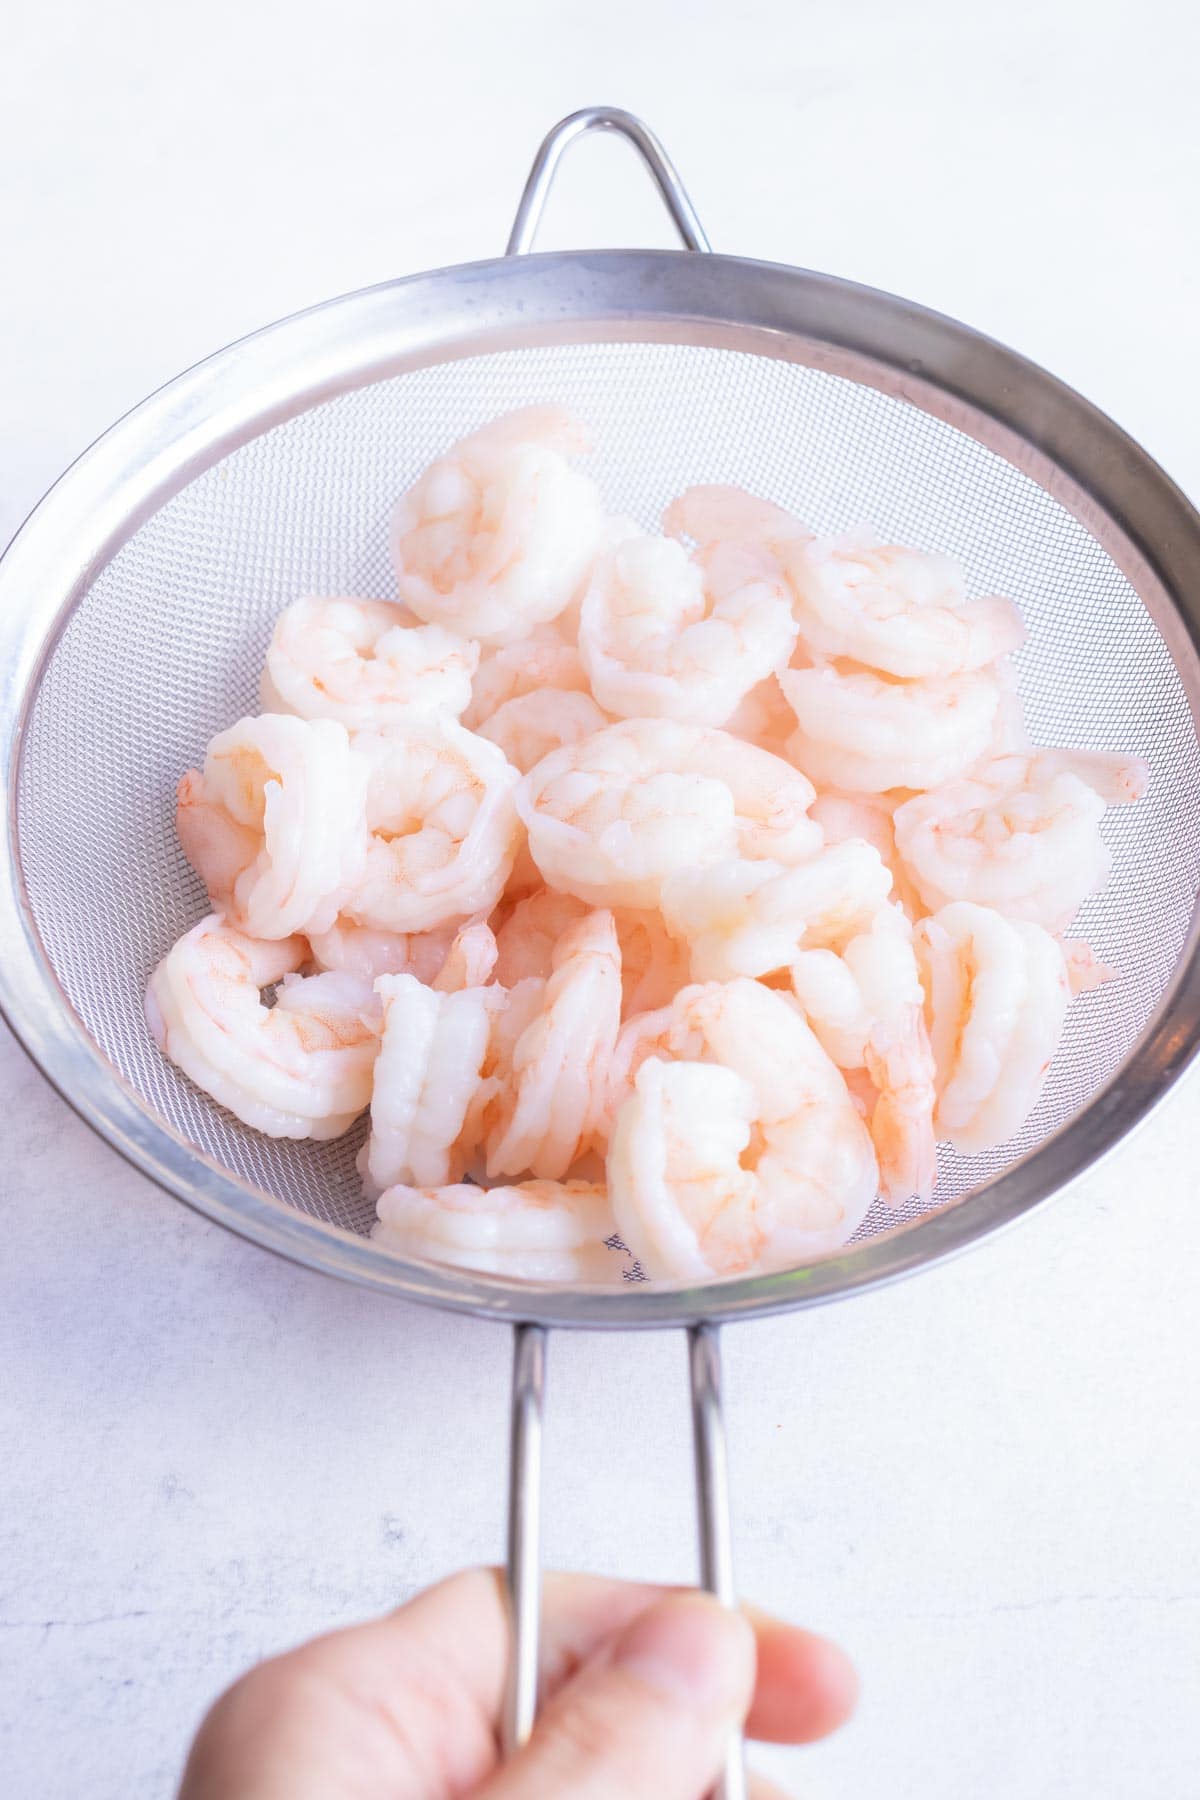 Pre-boiled pink shrimp drained in a small strainer.